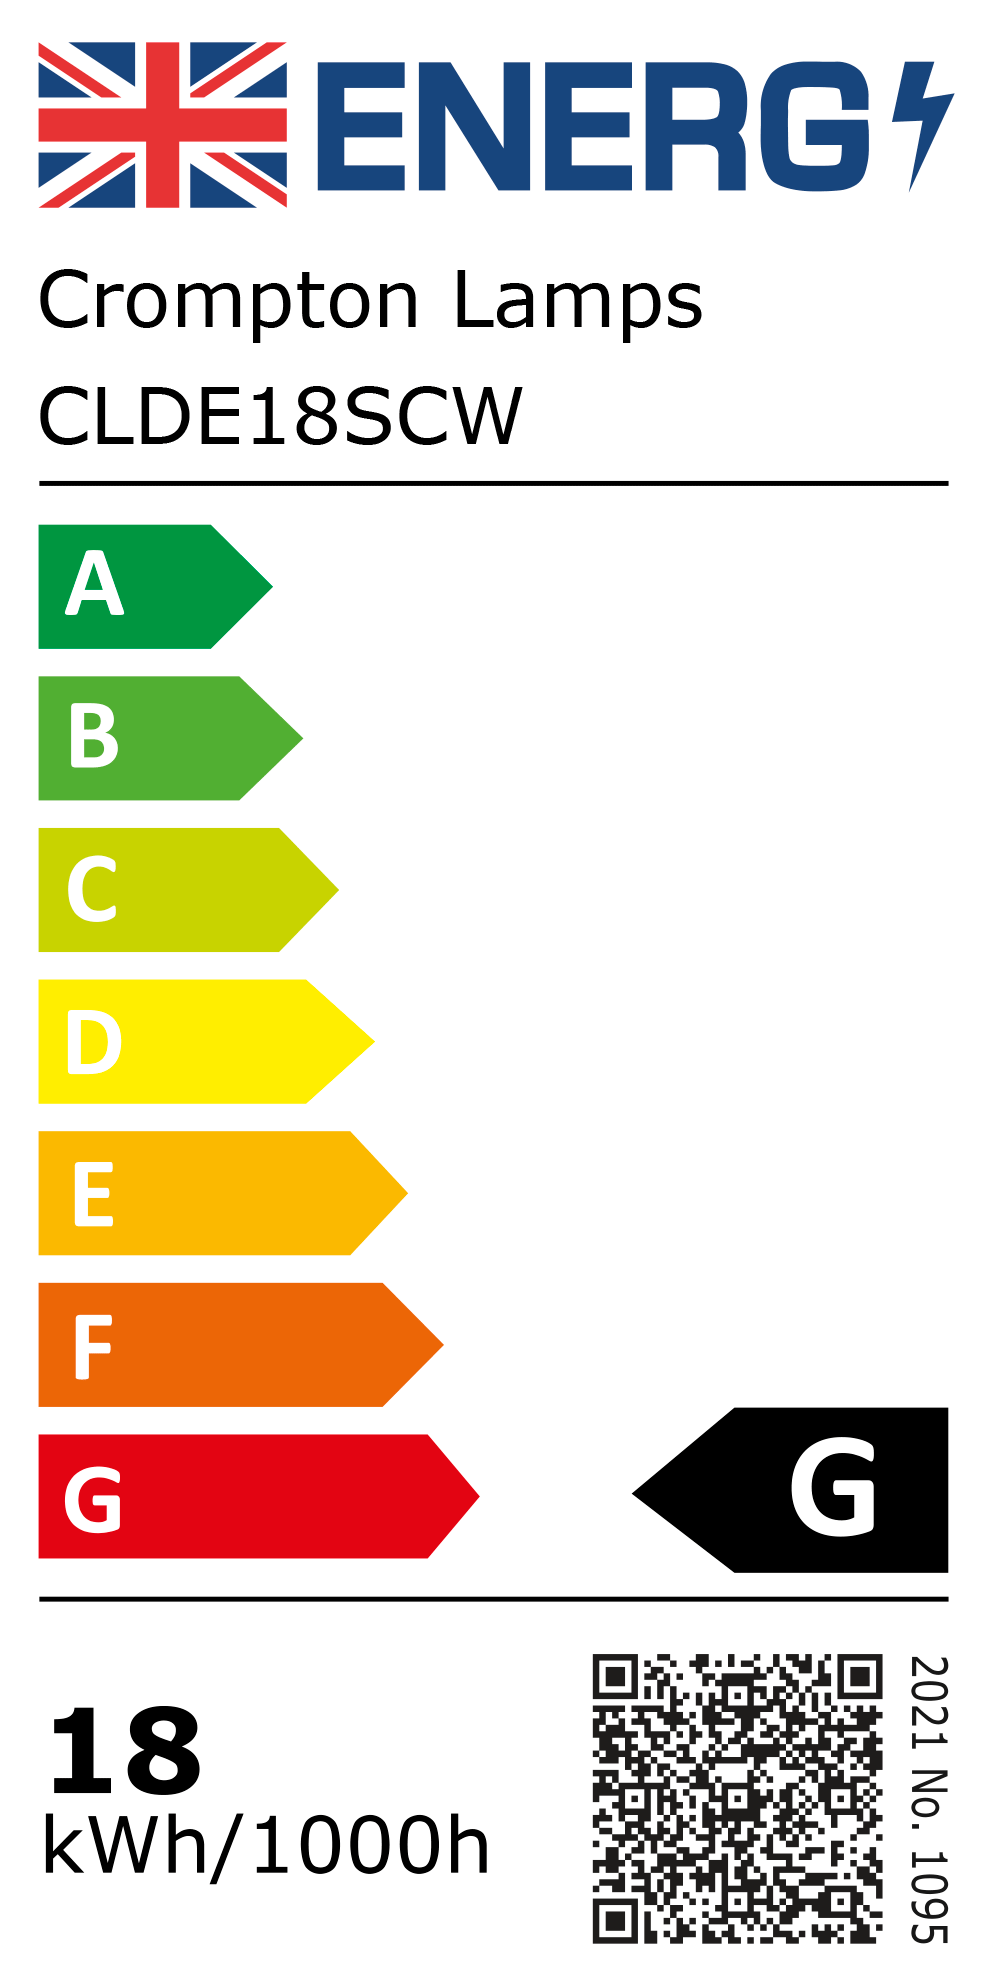 New 2021 Energy Rating Label: Stock Code CLDE18SCW